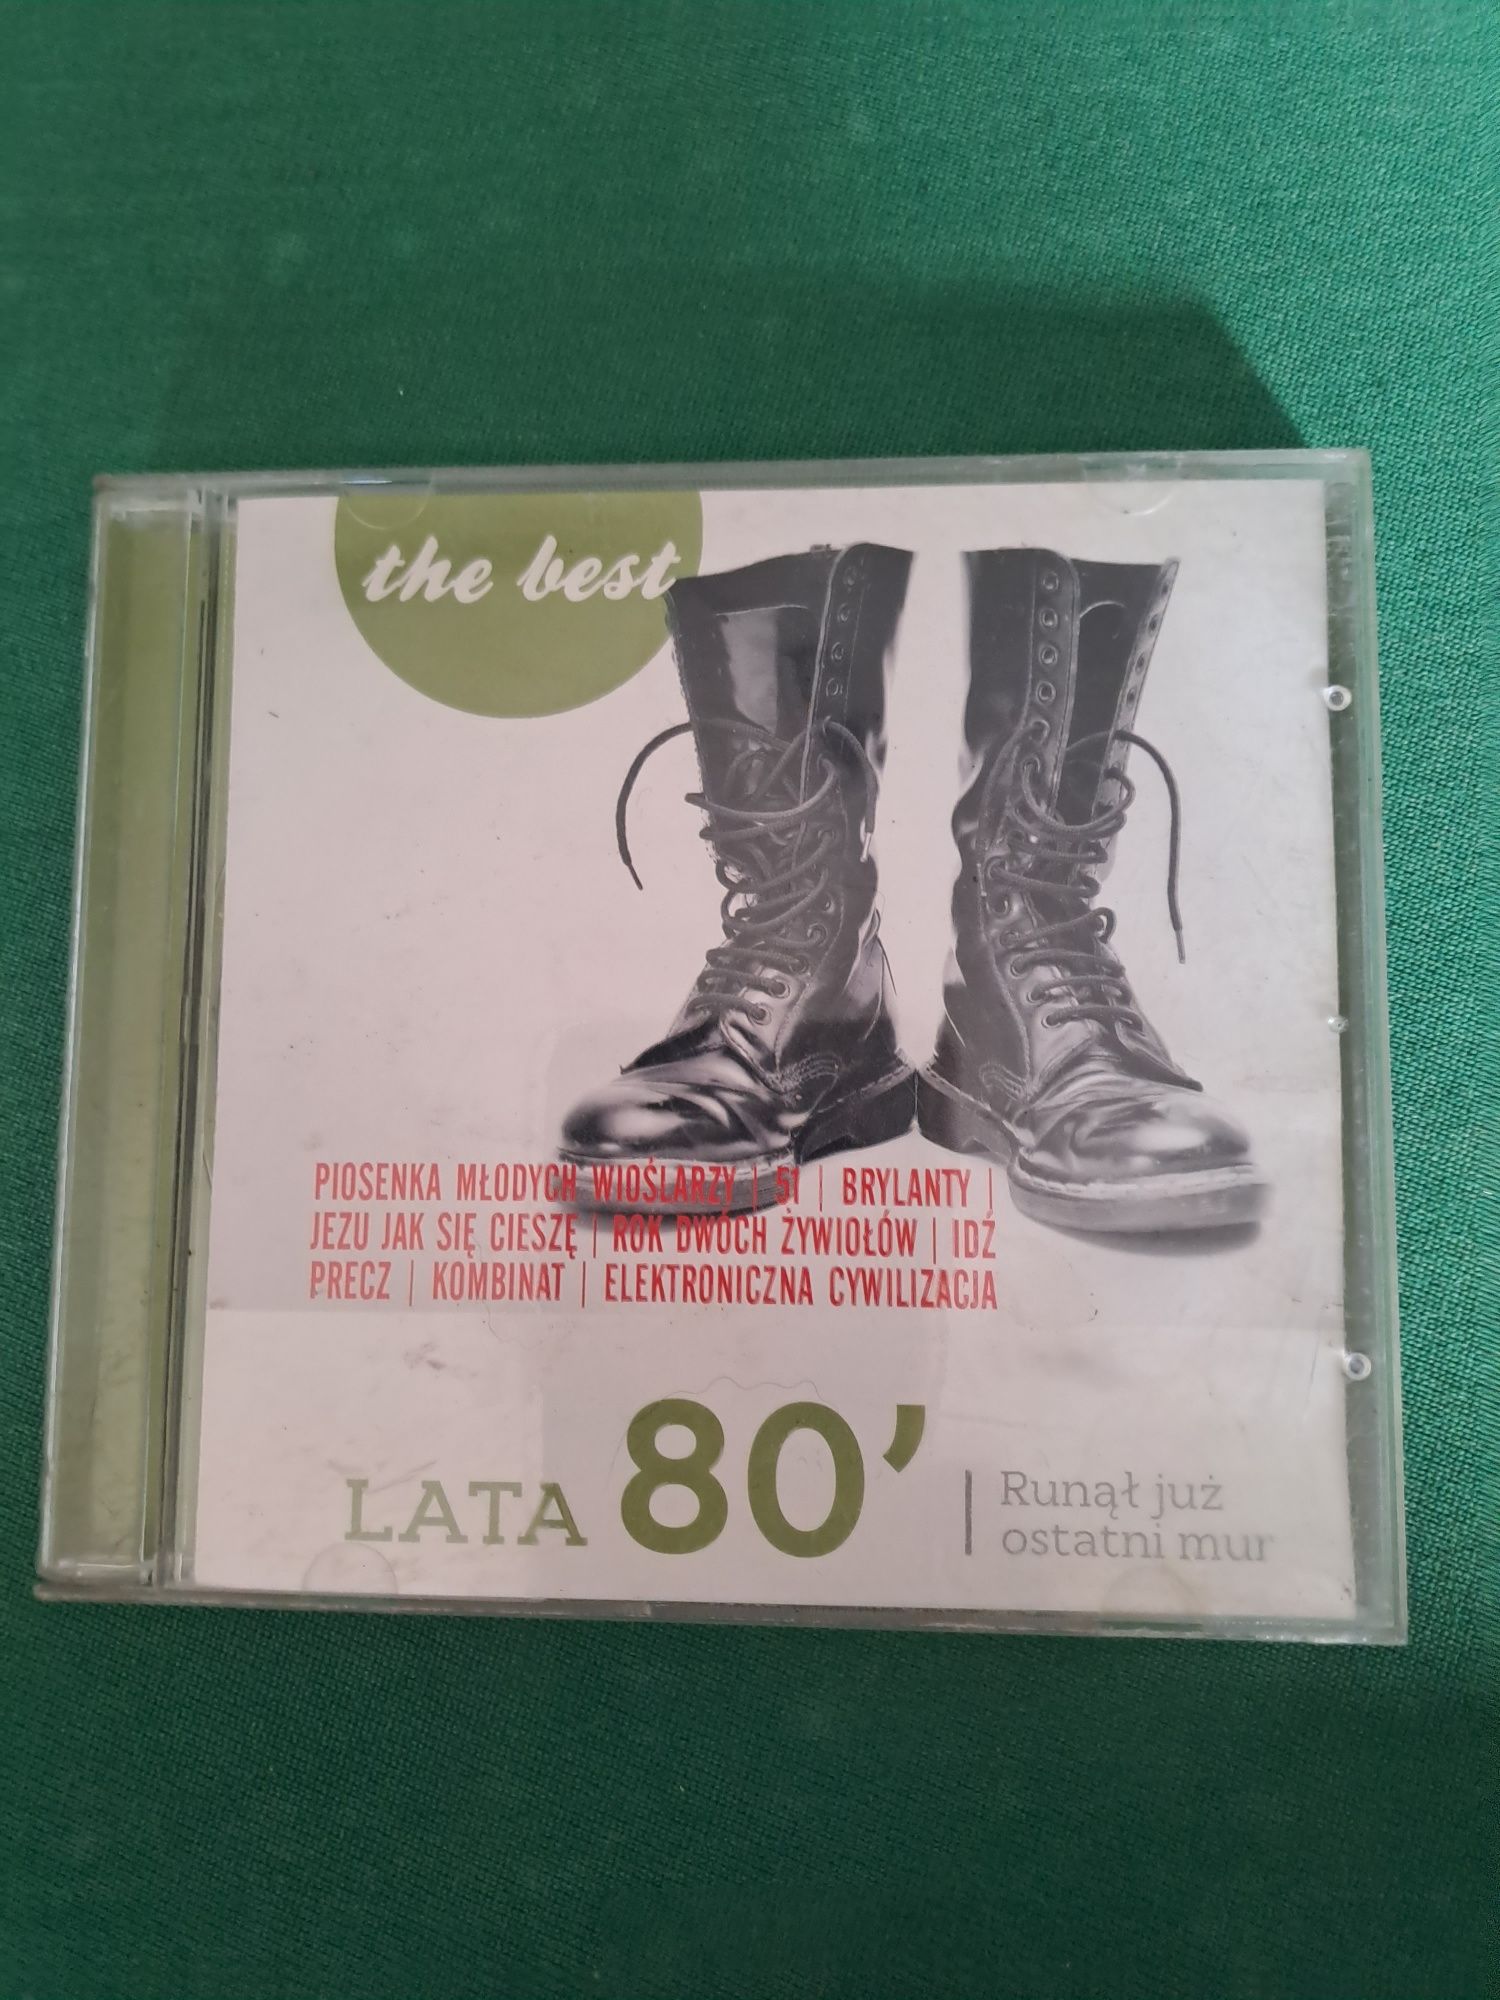 The Best lata 80